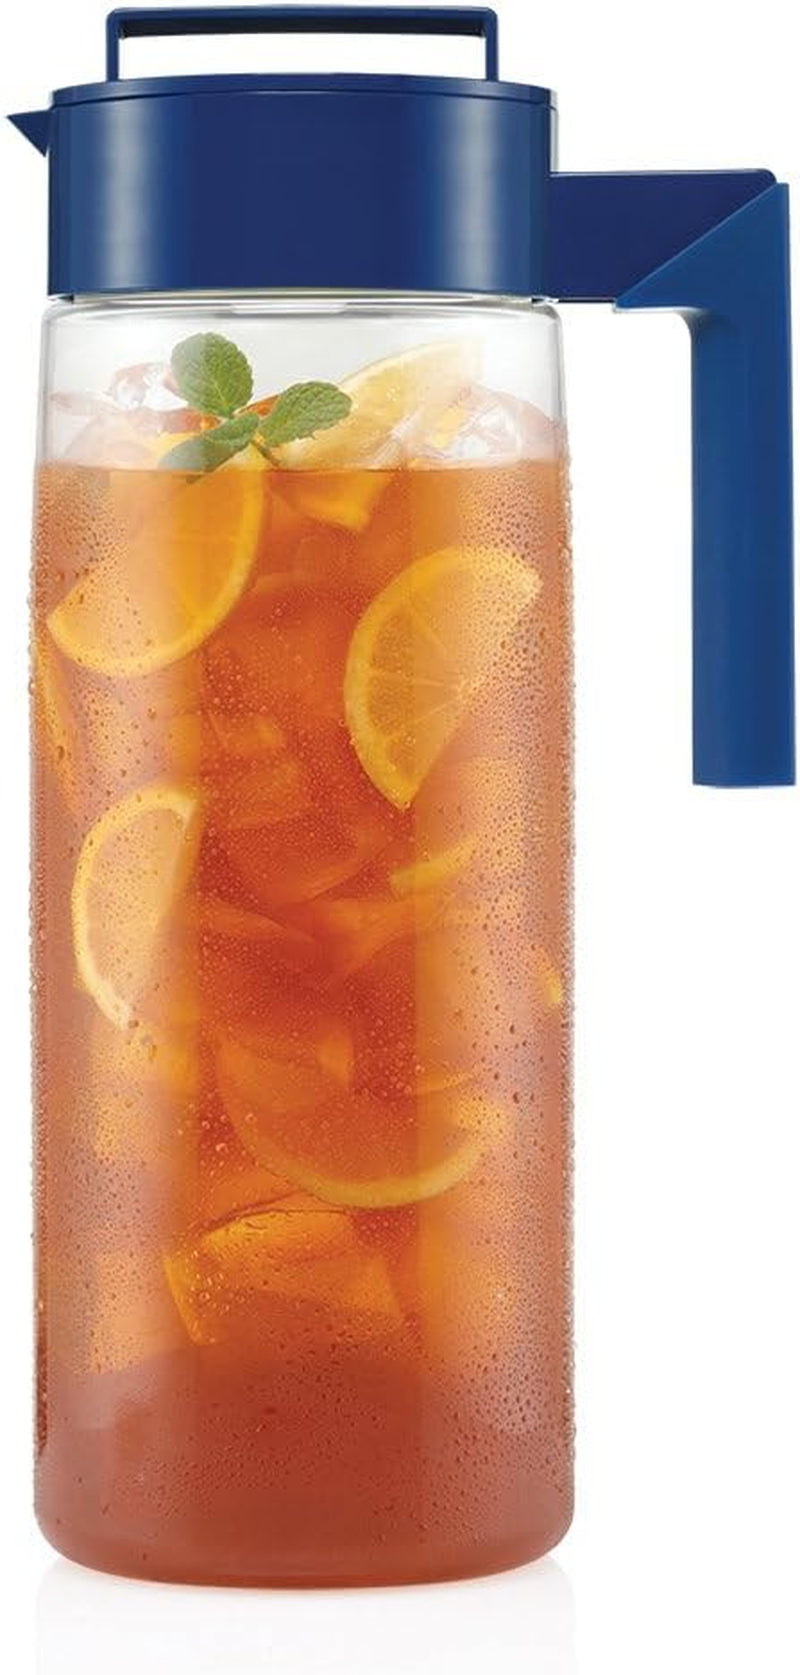 Takeya Premium Quality Iced Tea Maker Iced Tea Maker with Patented Flash Chill Technology Made in the USA, BPA Free, 2 qt, Raspberry & Iced Tea Maker, 2 qt, Blueberry